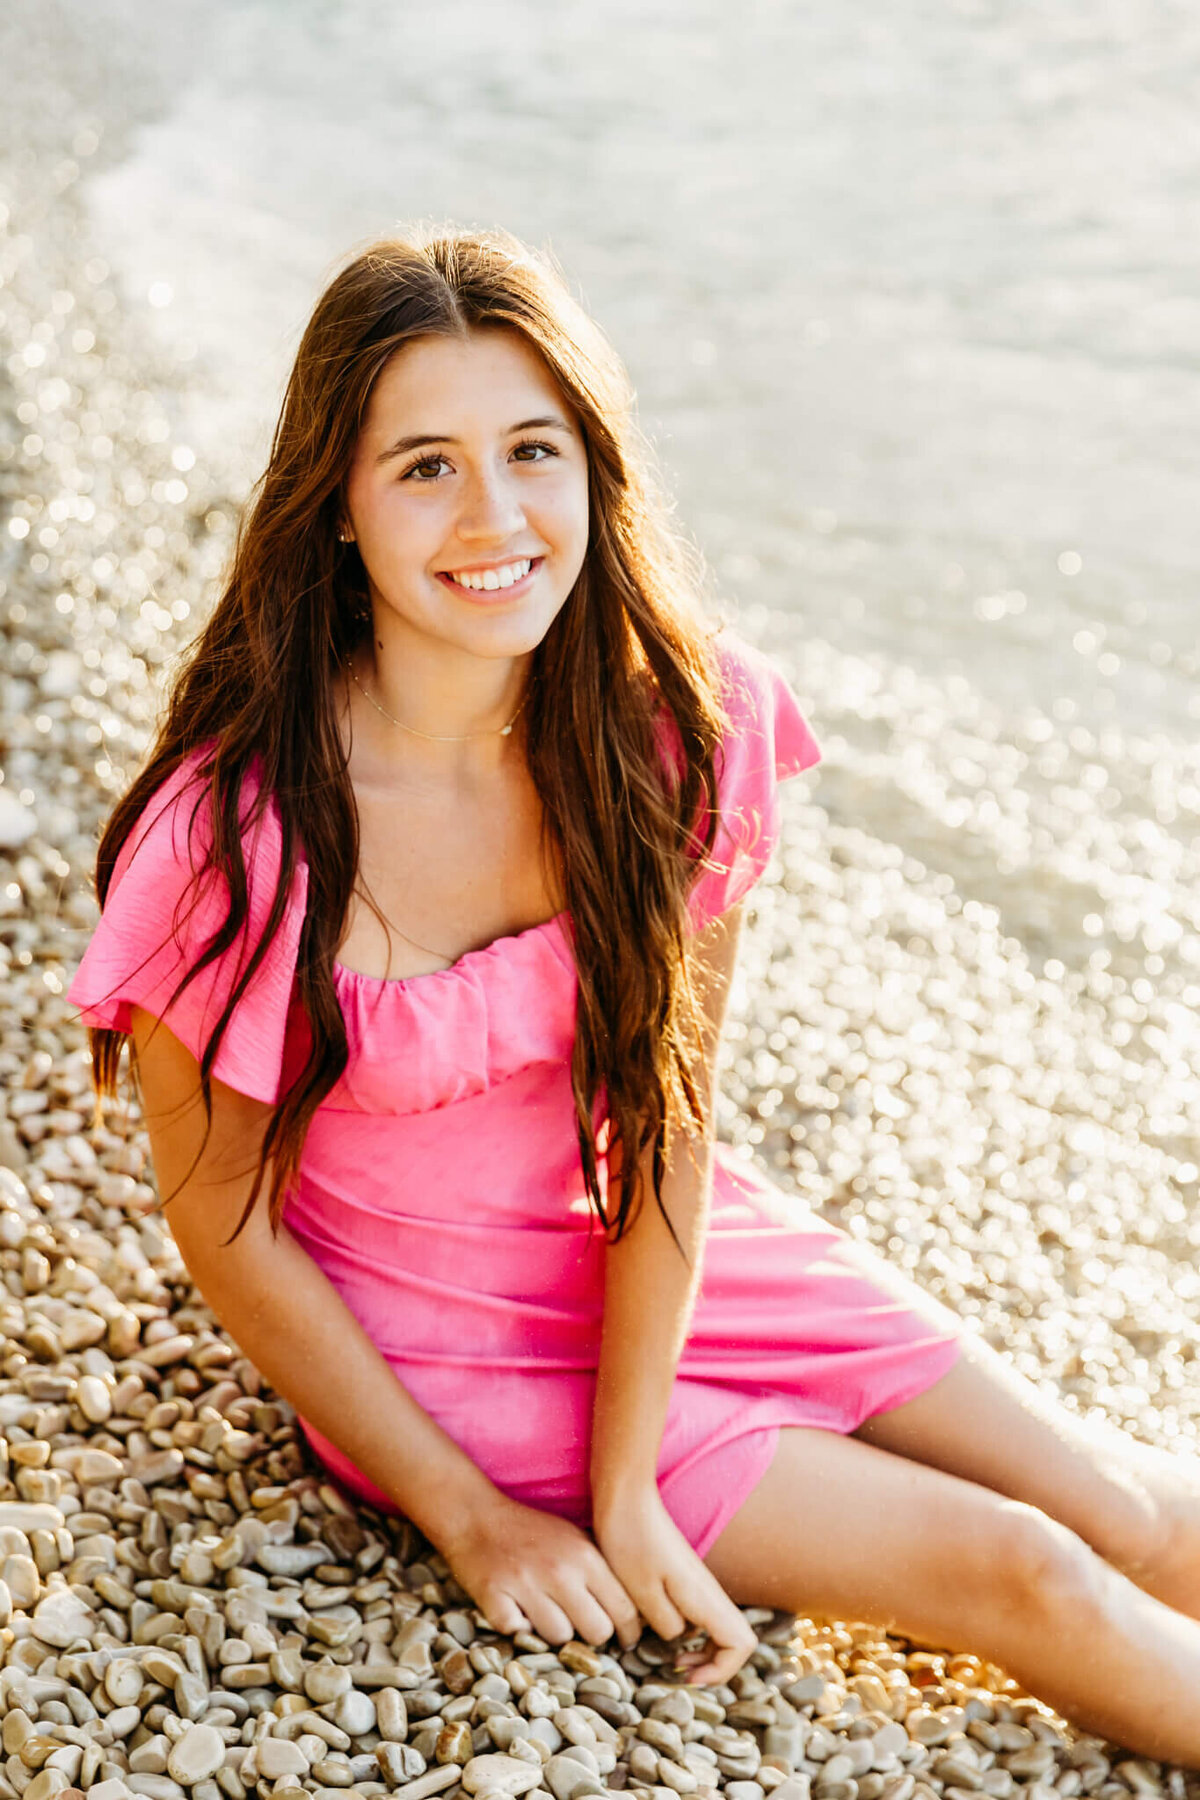 image of a pretty teen girl sitting on a beach and looking up